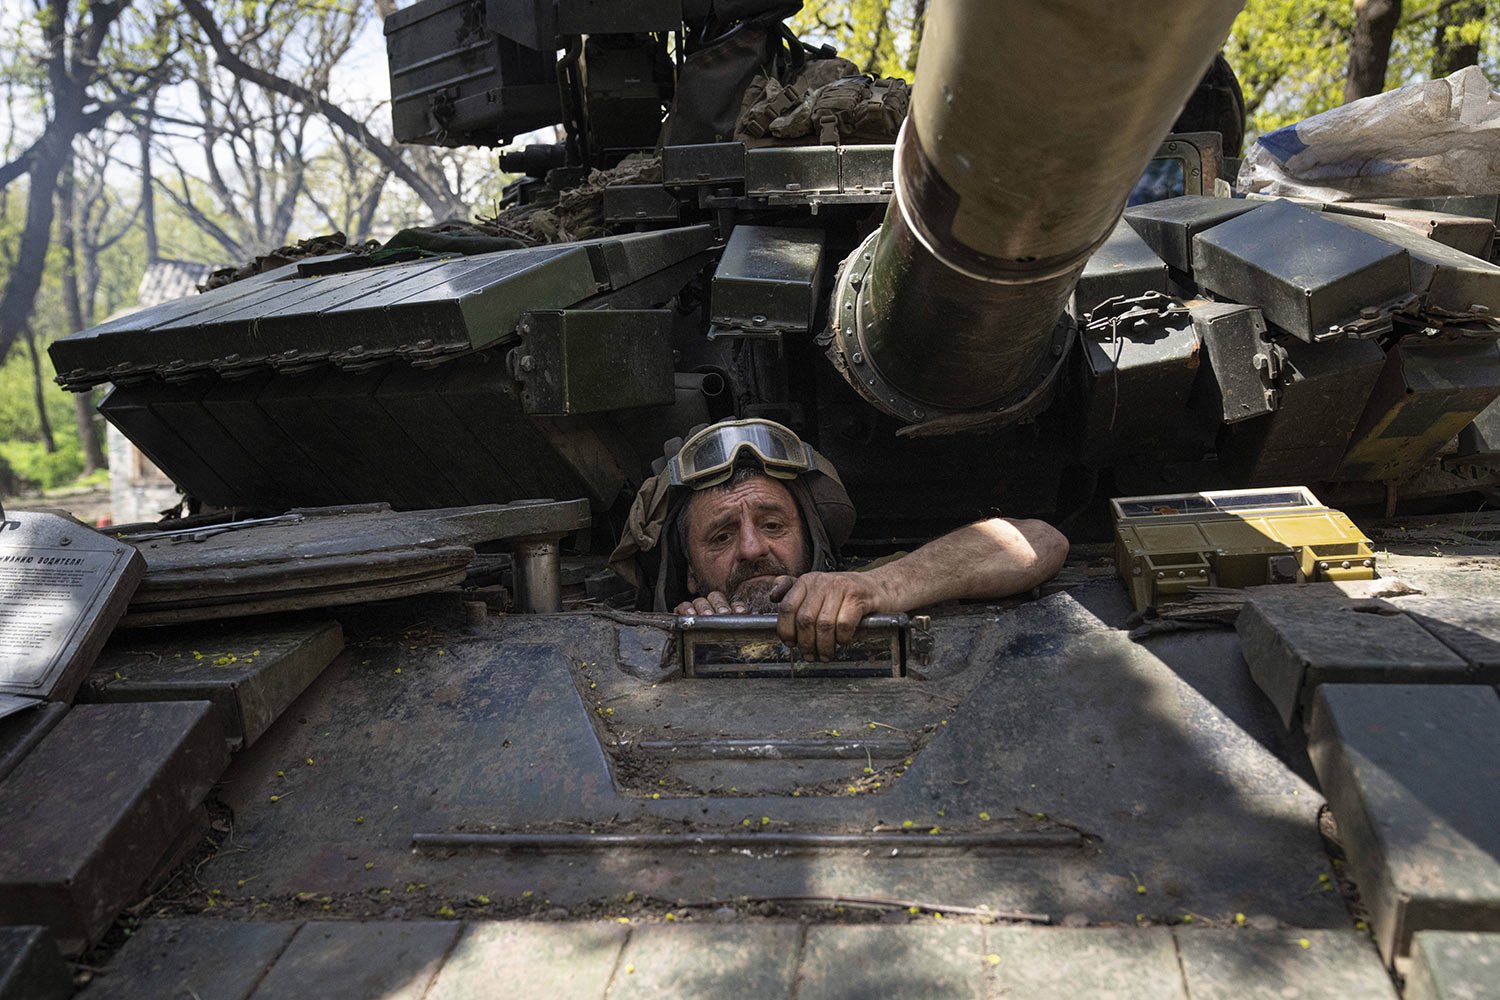  A Ukrainian serviceman enters a tank to make repairs after fighting against Russian forces in the Donetsk region of eastern Ukraine, Wednesday, April 27, 2022. (AP Photo/Evgeniy Maloletka) 